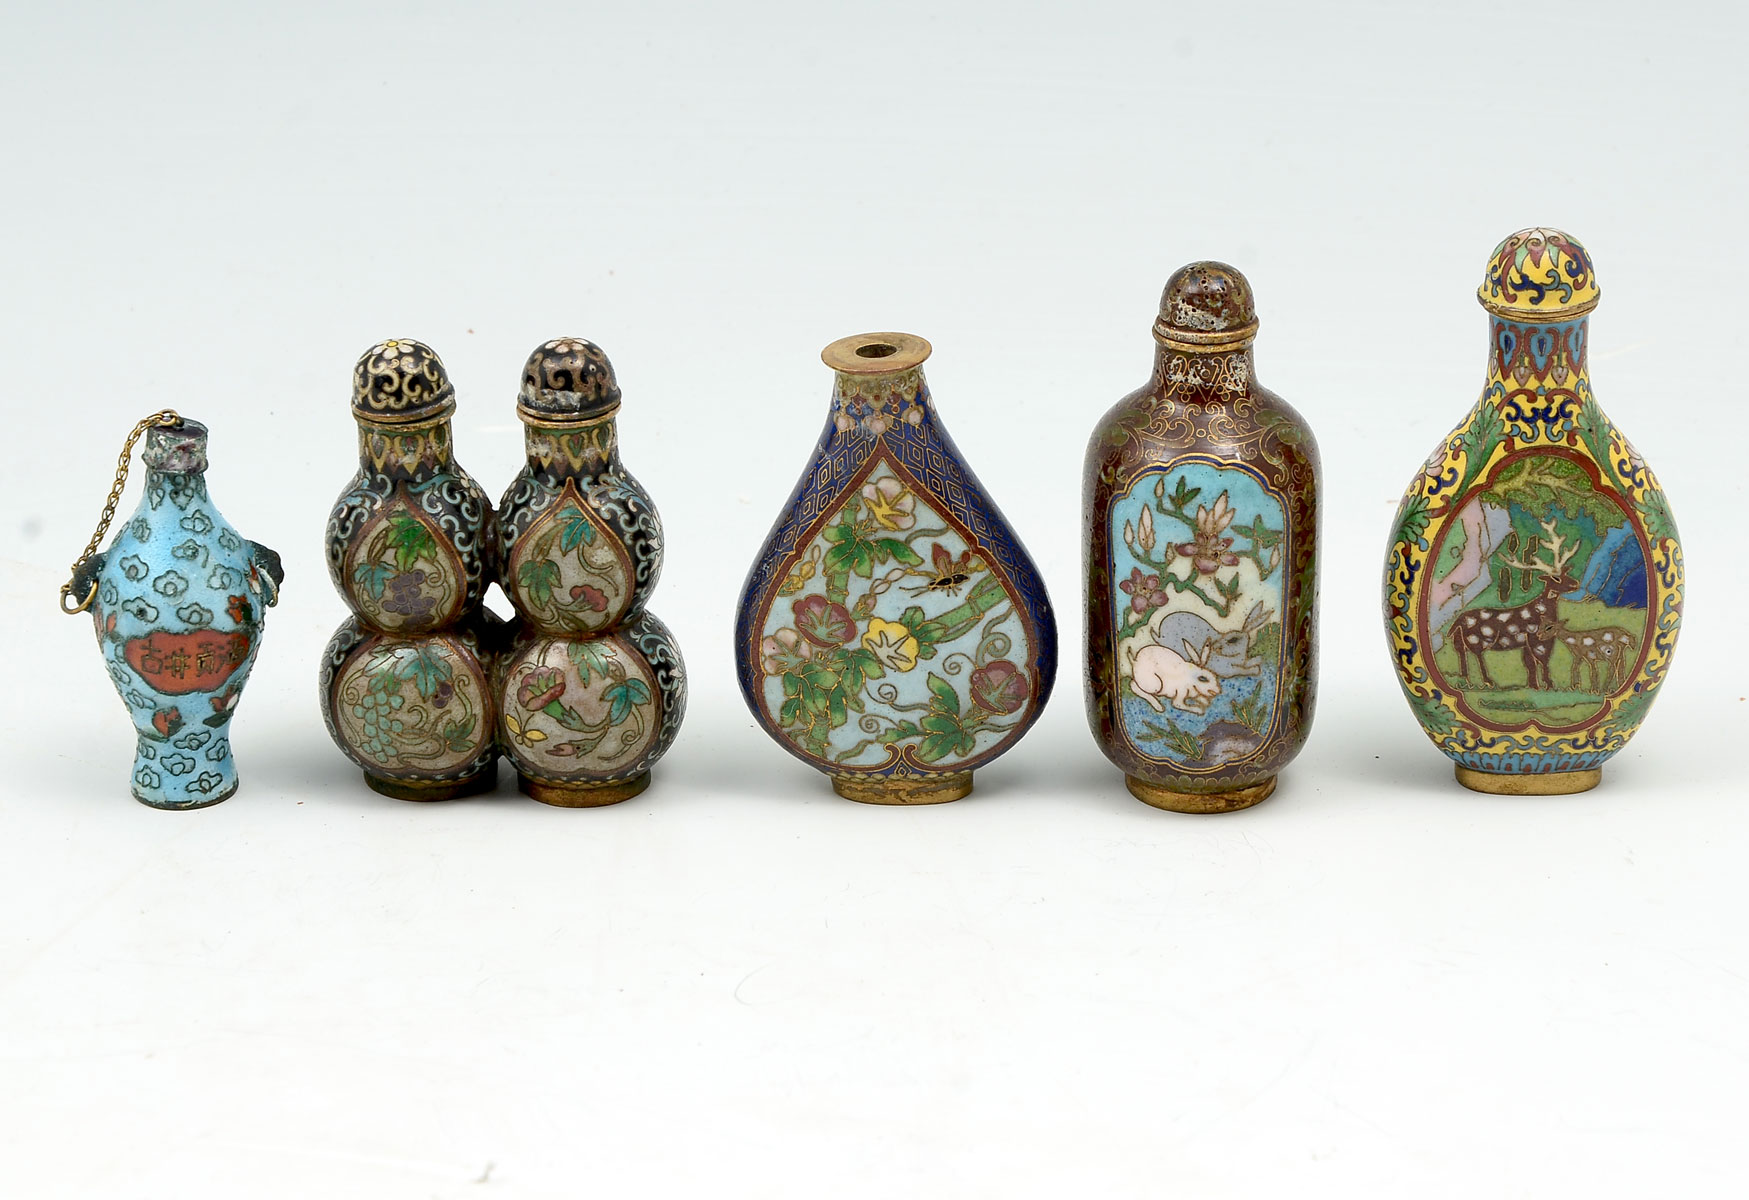 5 PC. CHINESE CLOISONNE SNUFF BOTTLES: